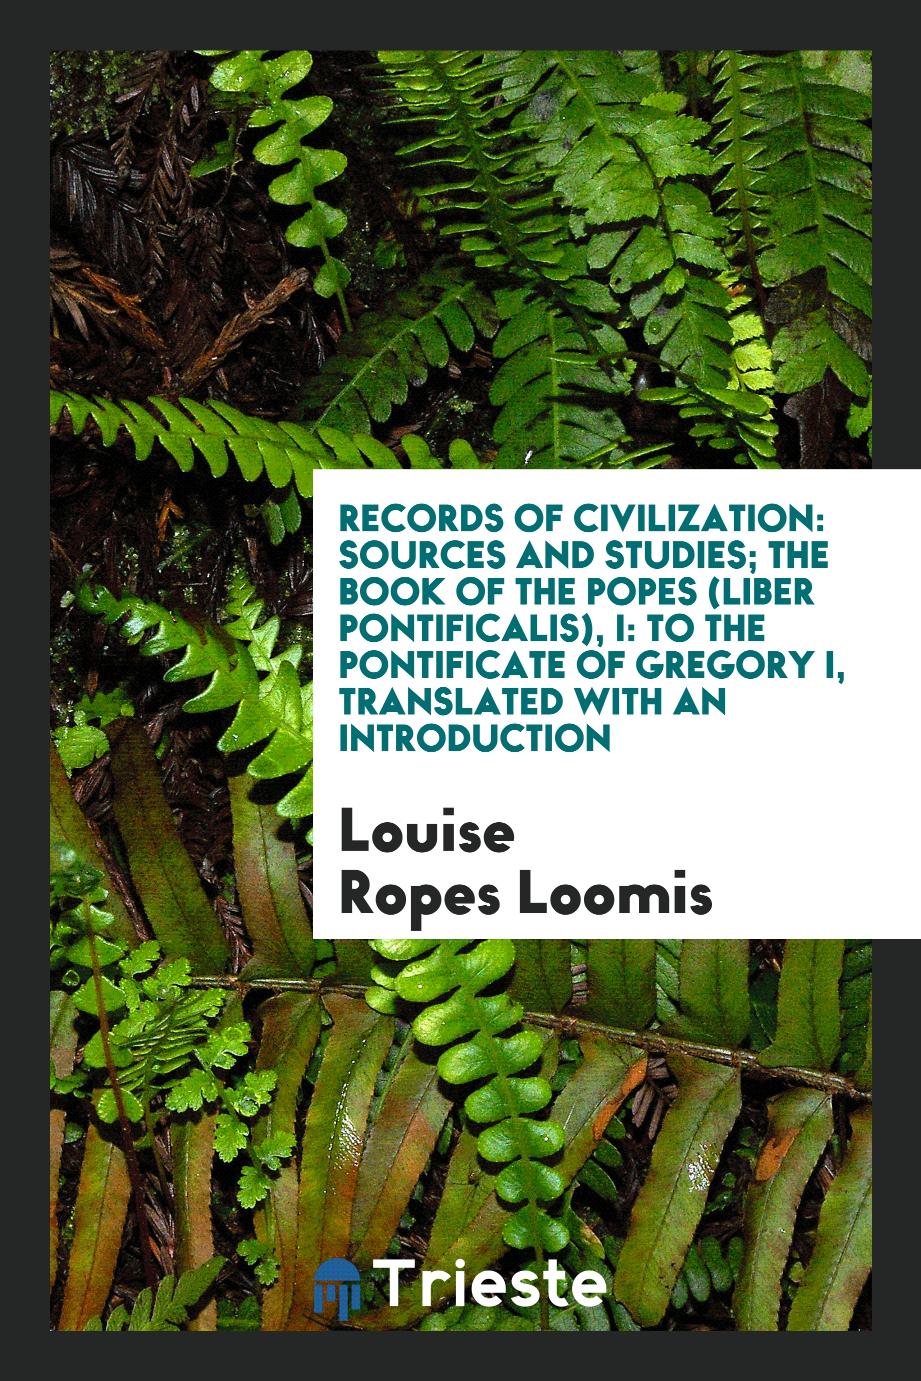 Louise Ropes Loomis - Records of Civilization: Sources and Studies; The Book of the Popes (Liber Pontificalis), I: To the Pontificate of Gregory I, Translated with an Introduction